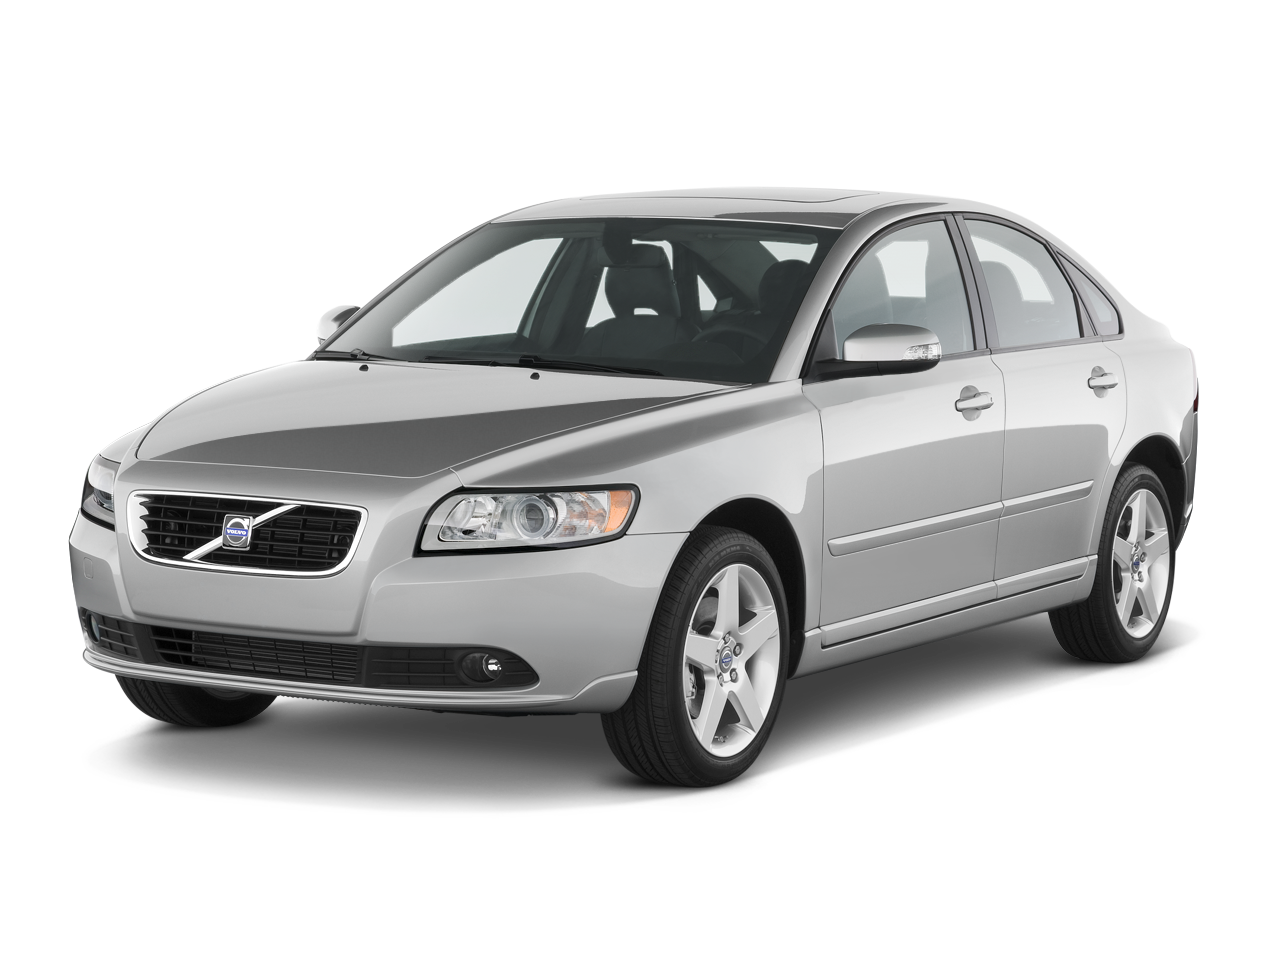 2011 Volvo S40 Prices, Reviews, and Photos - MotorTrend